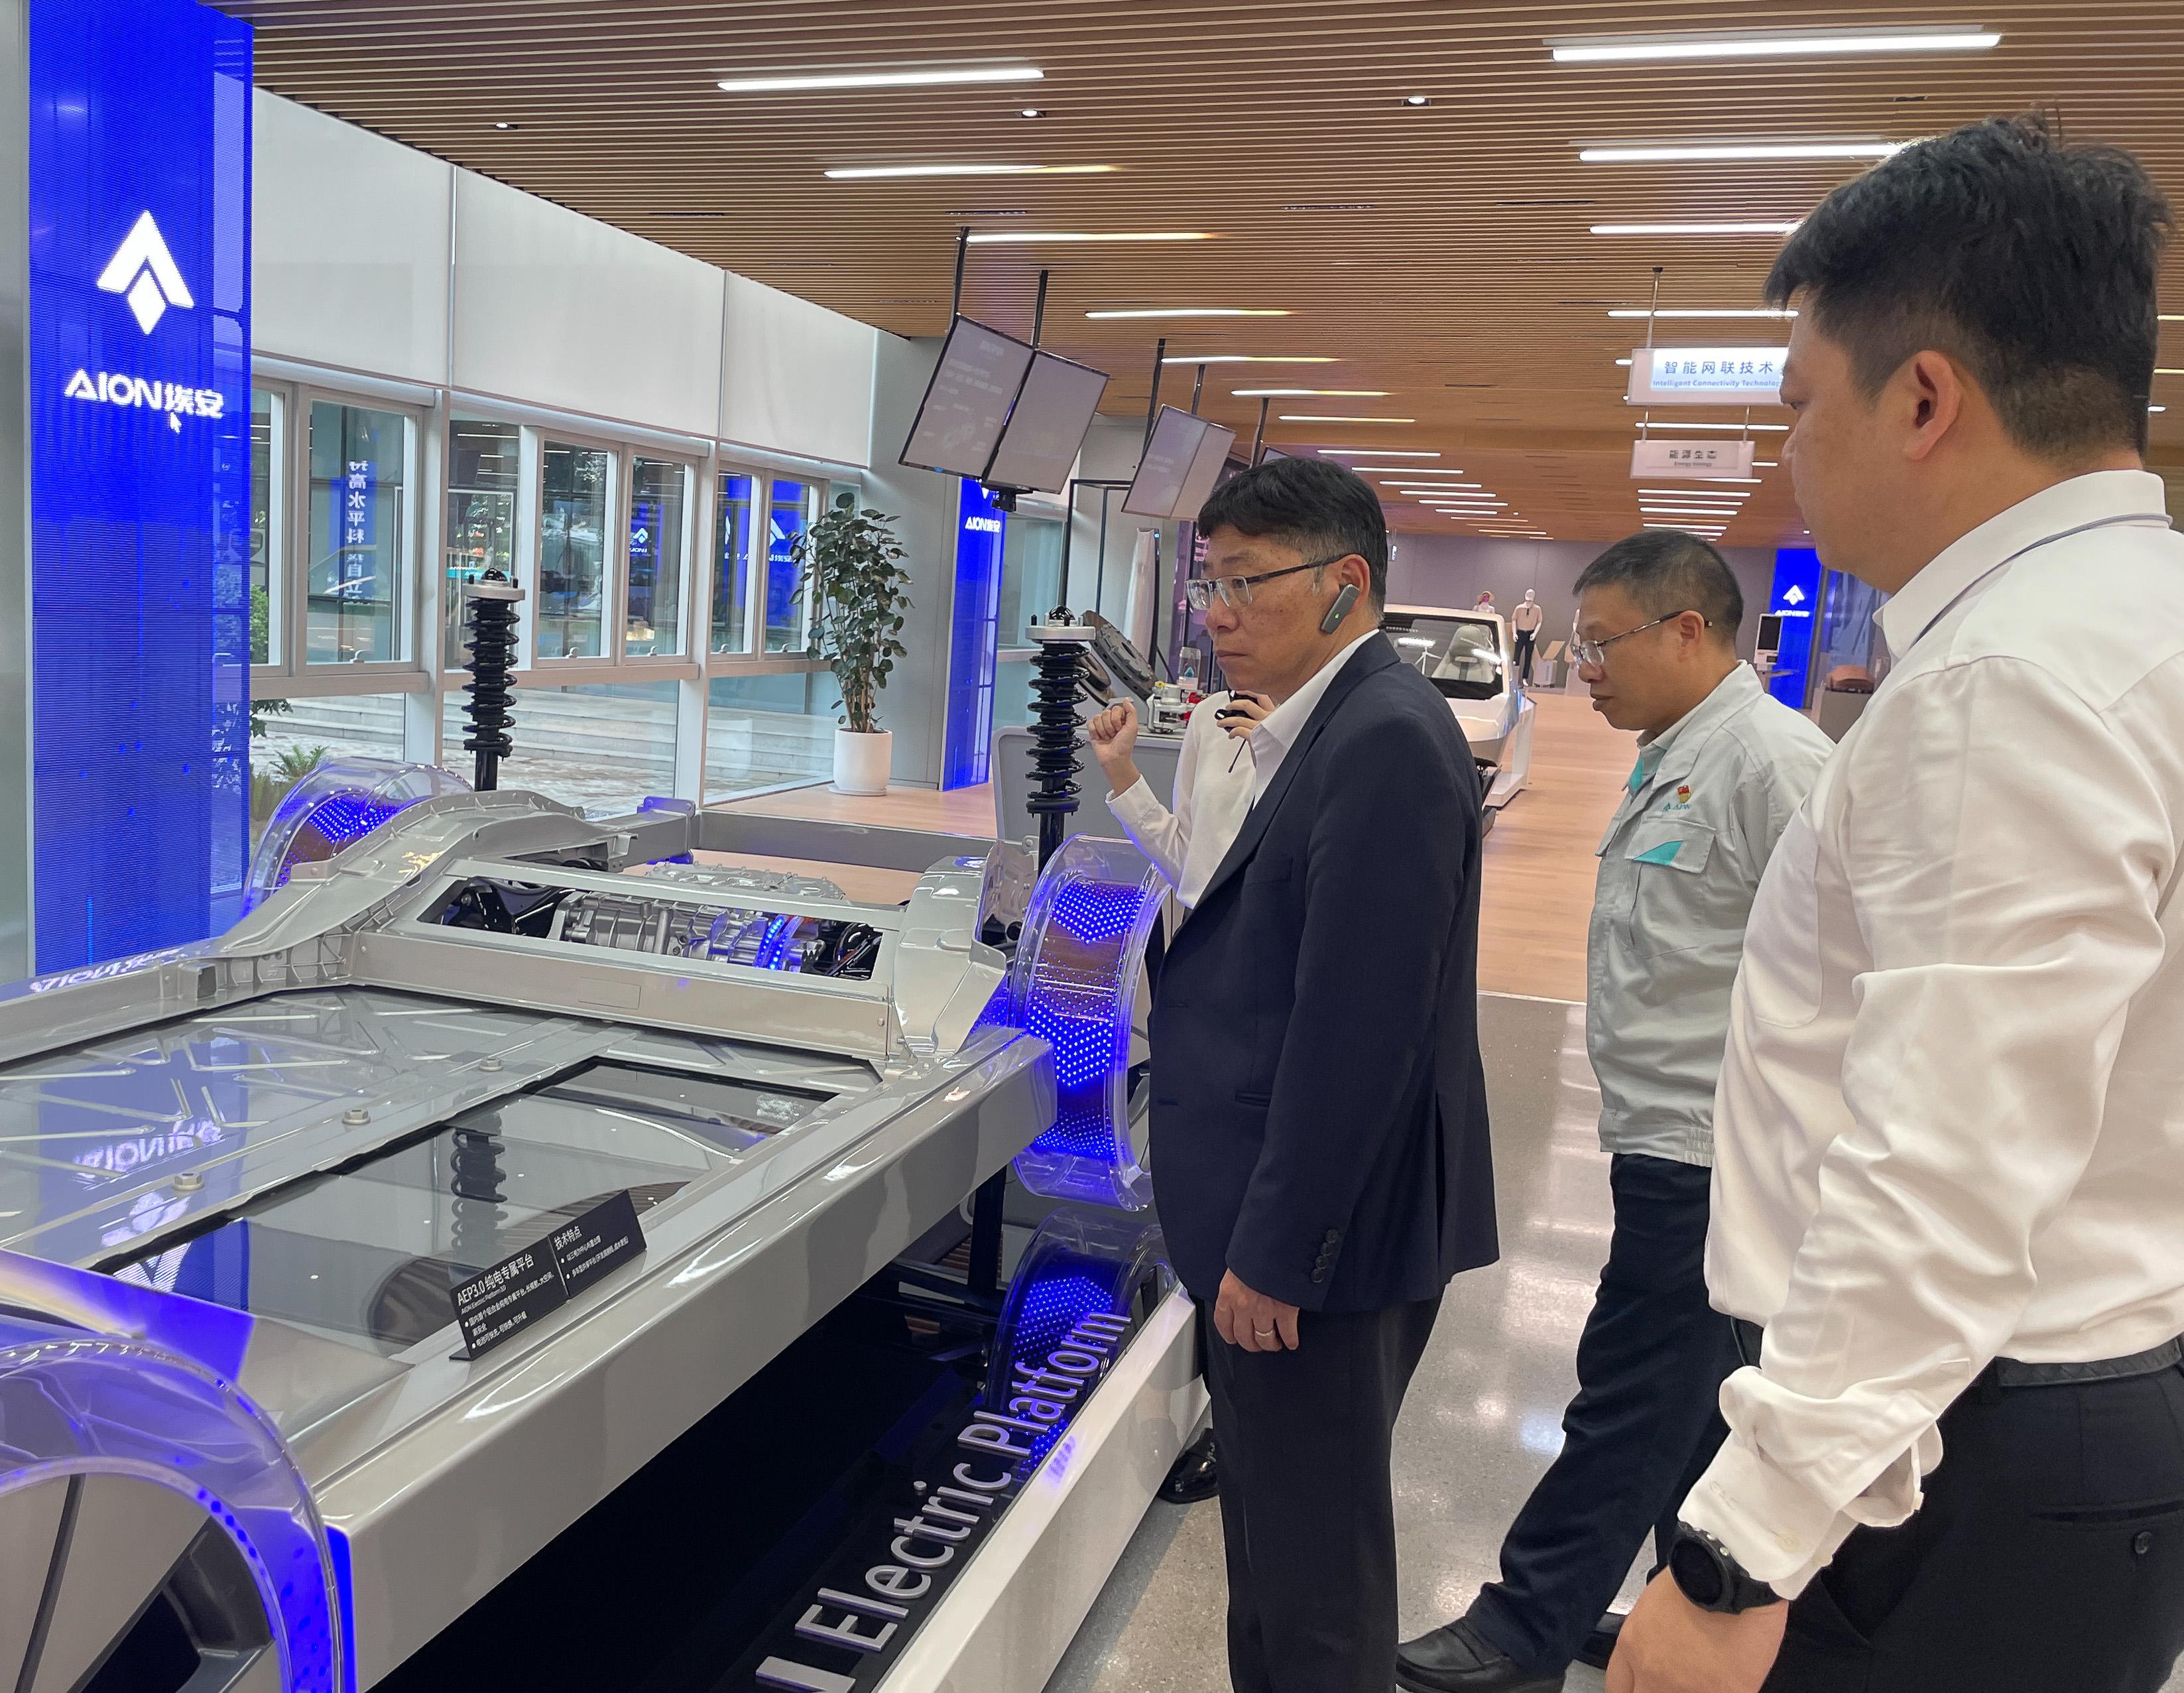 The Secretary for Transport and Logistics, Mr Lam Sai-hung, began a two-day visit to Guangzhou today (September 20) to better understand the latest developments in smart mobility there. Photo shows Mr Lam (left) visiting Guangzhou Automobile Group Co. Ltd (GAC) to understand the research and development work of the GAC's autonomous driving technology and new energy commercial vehicles in recent years.